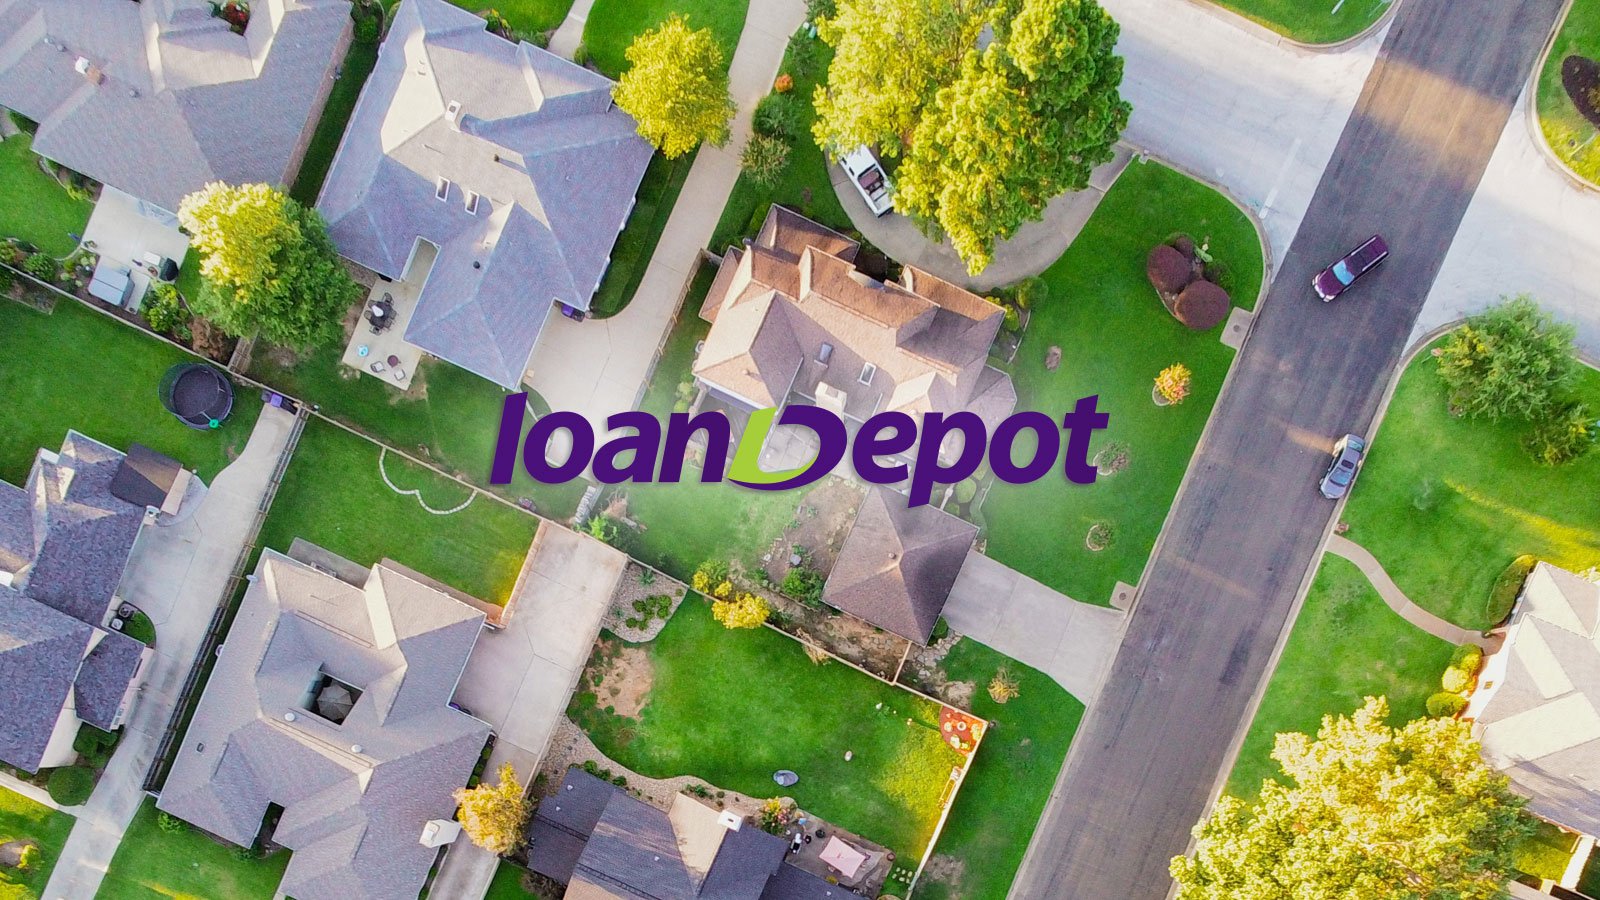 Mortgage firm loanDepot cyberattack impacts IT systems, payment portal